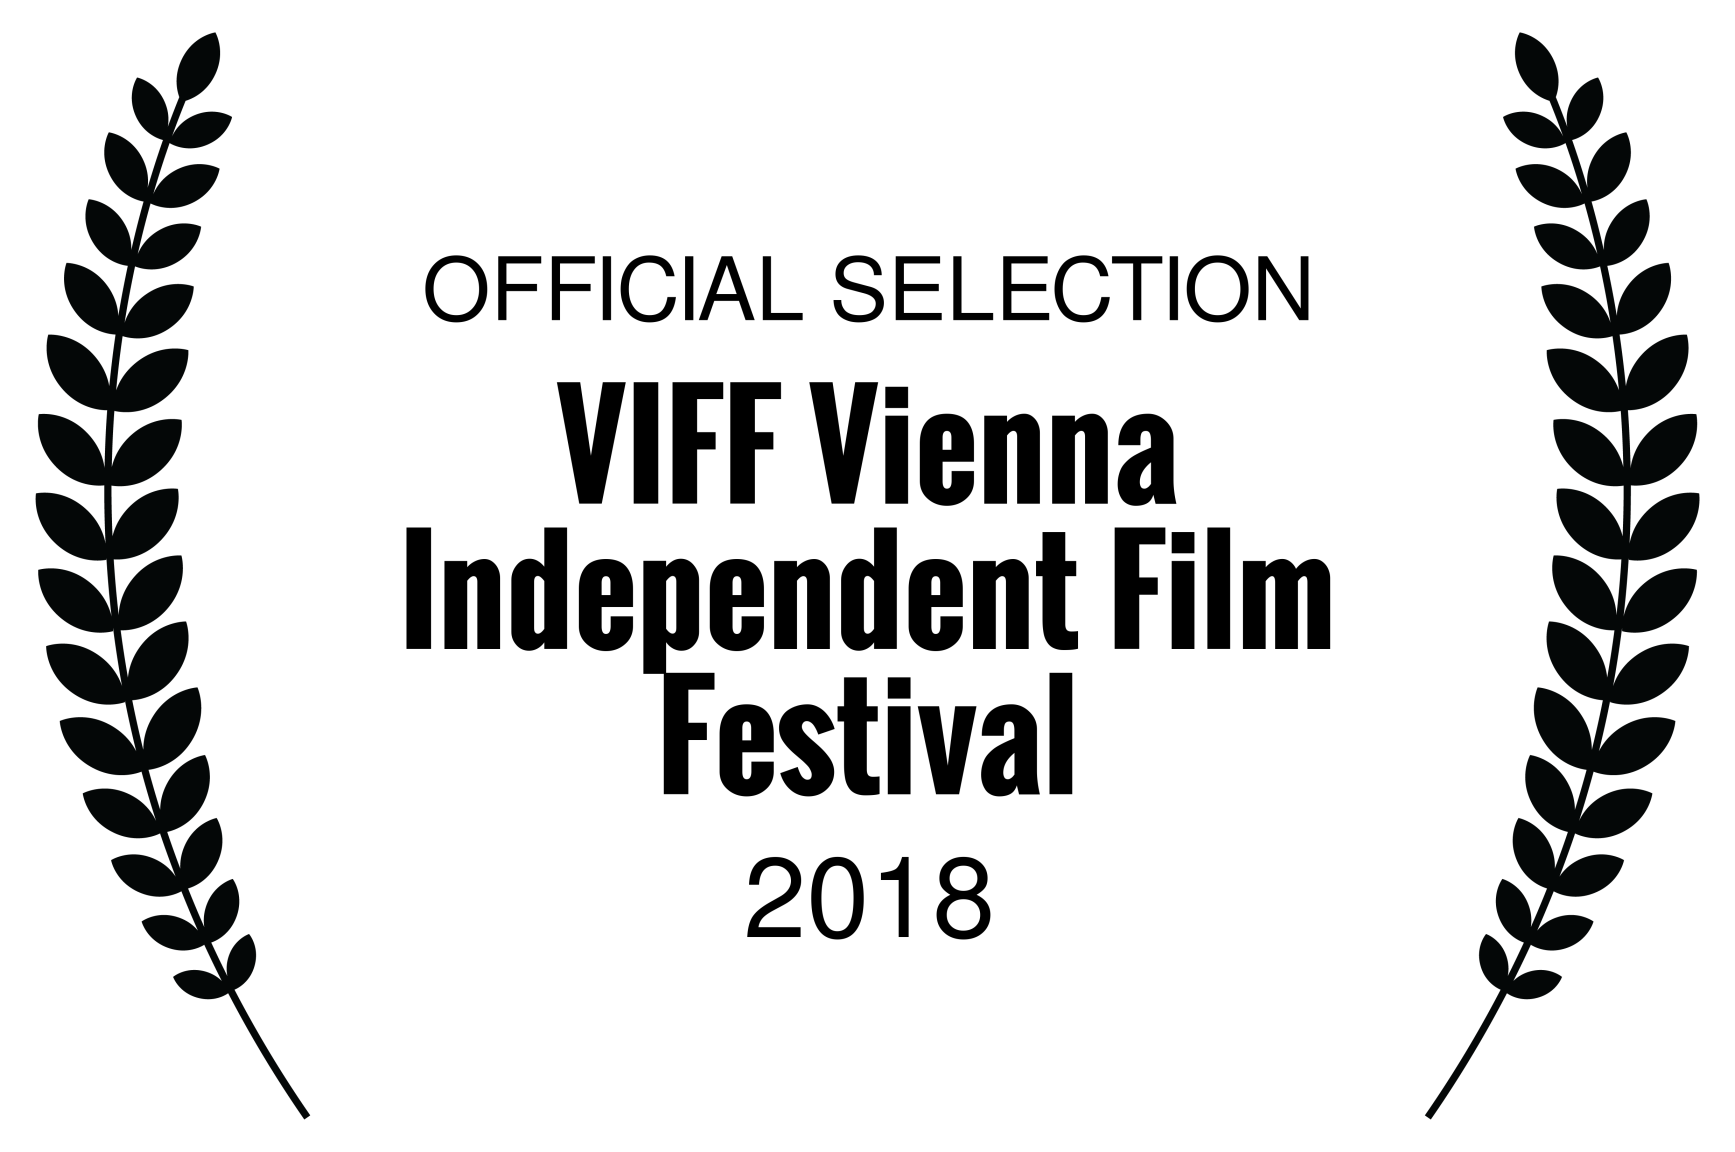 OFFICIAL SELECTION - VIFF Vienna Independent Film Festival - 2018.png